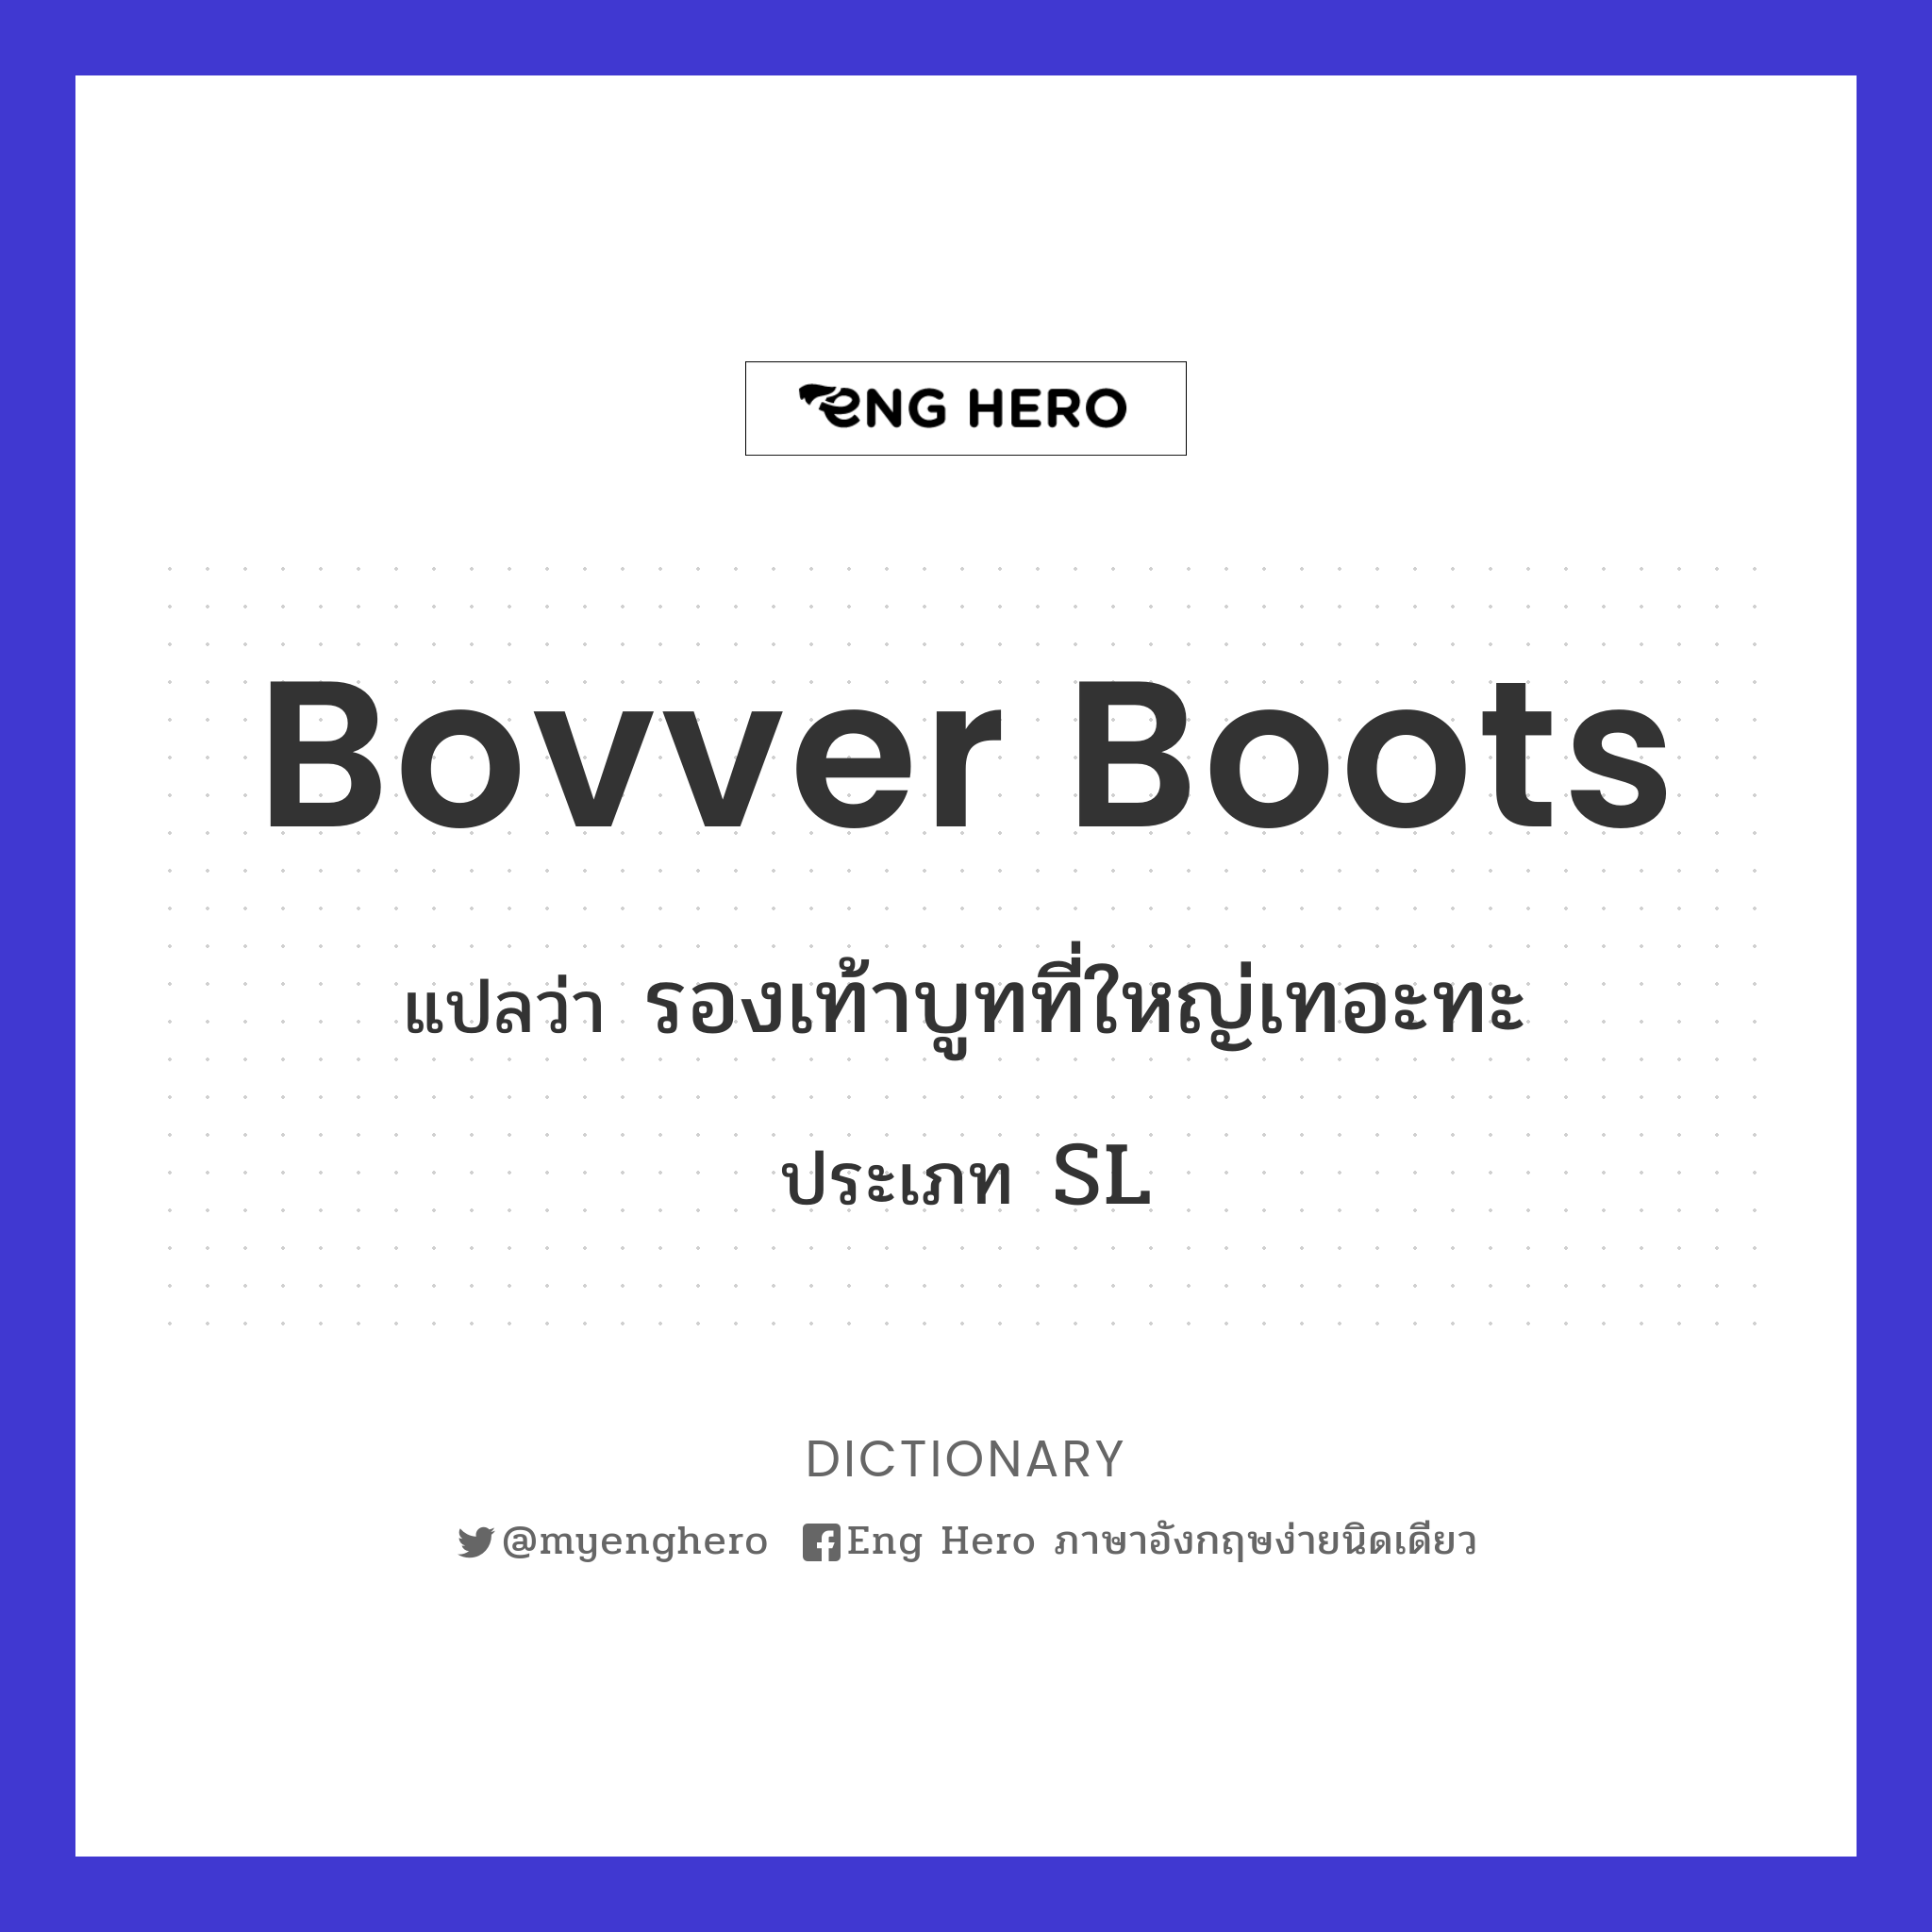 bovver boots